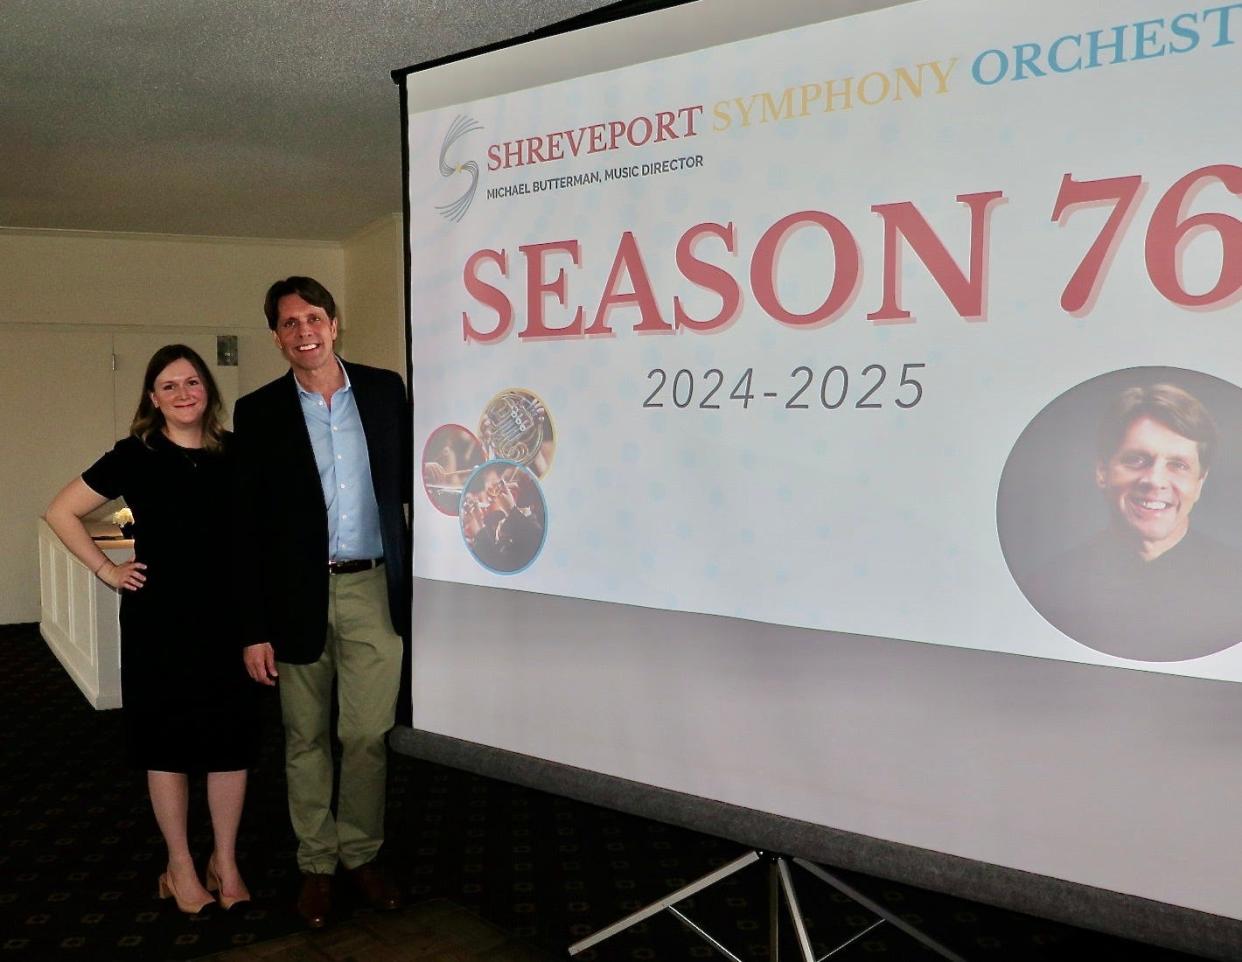 The 2024 Season Preview for the Shreveport Symphony Orchestra was held at East Ridge Country Club.